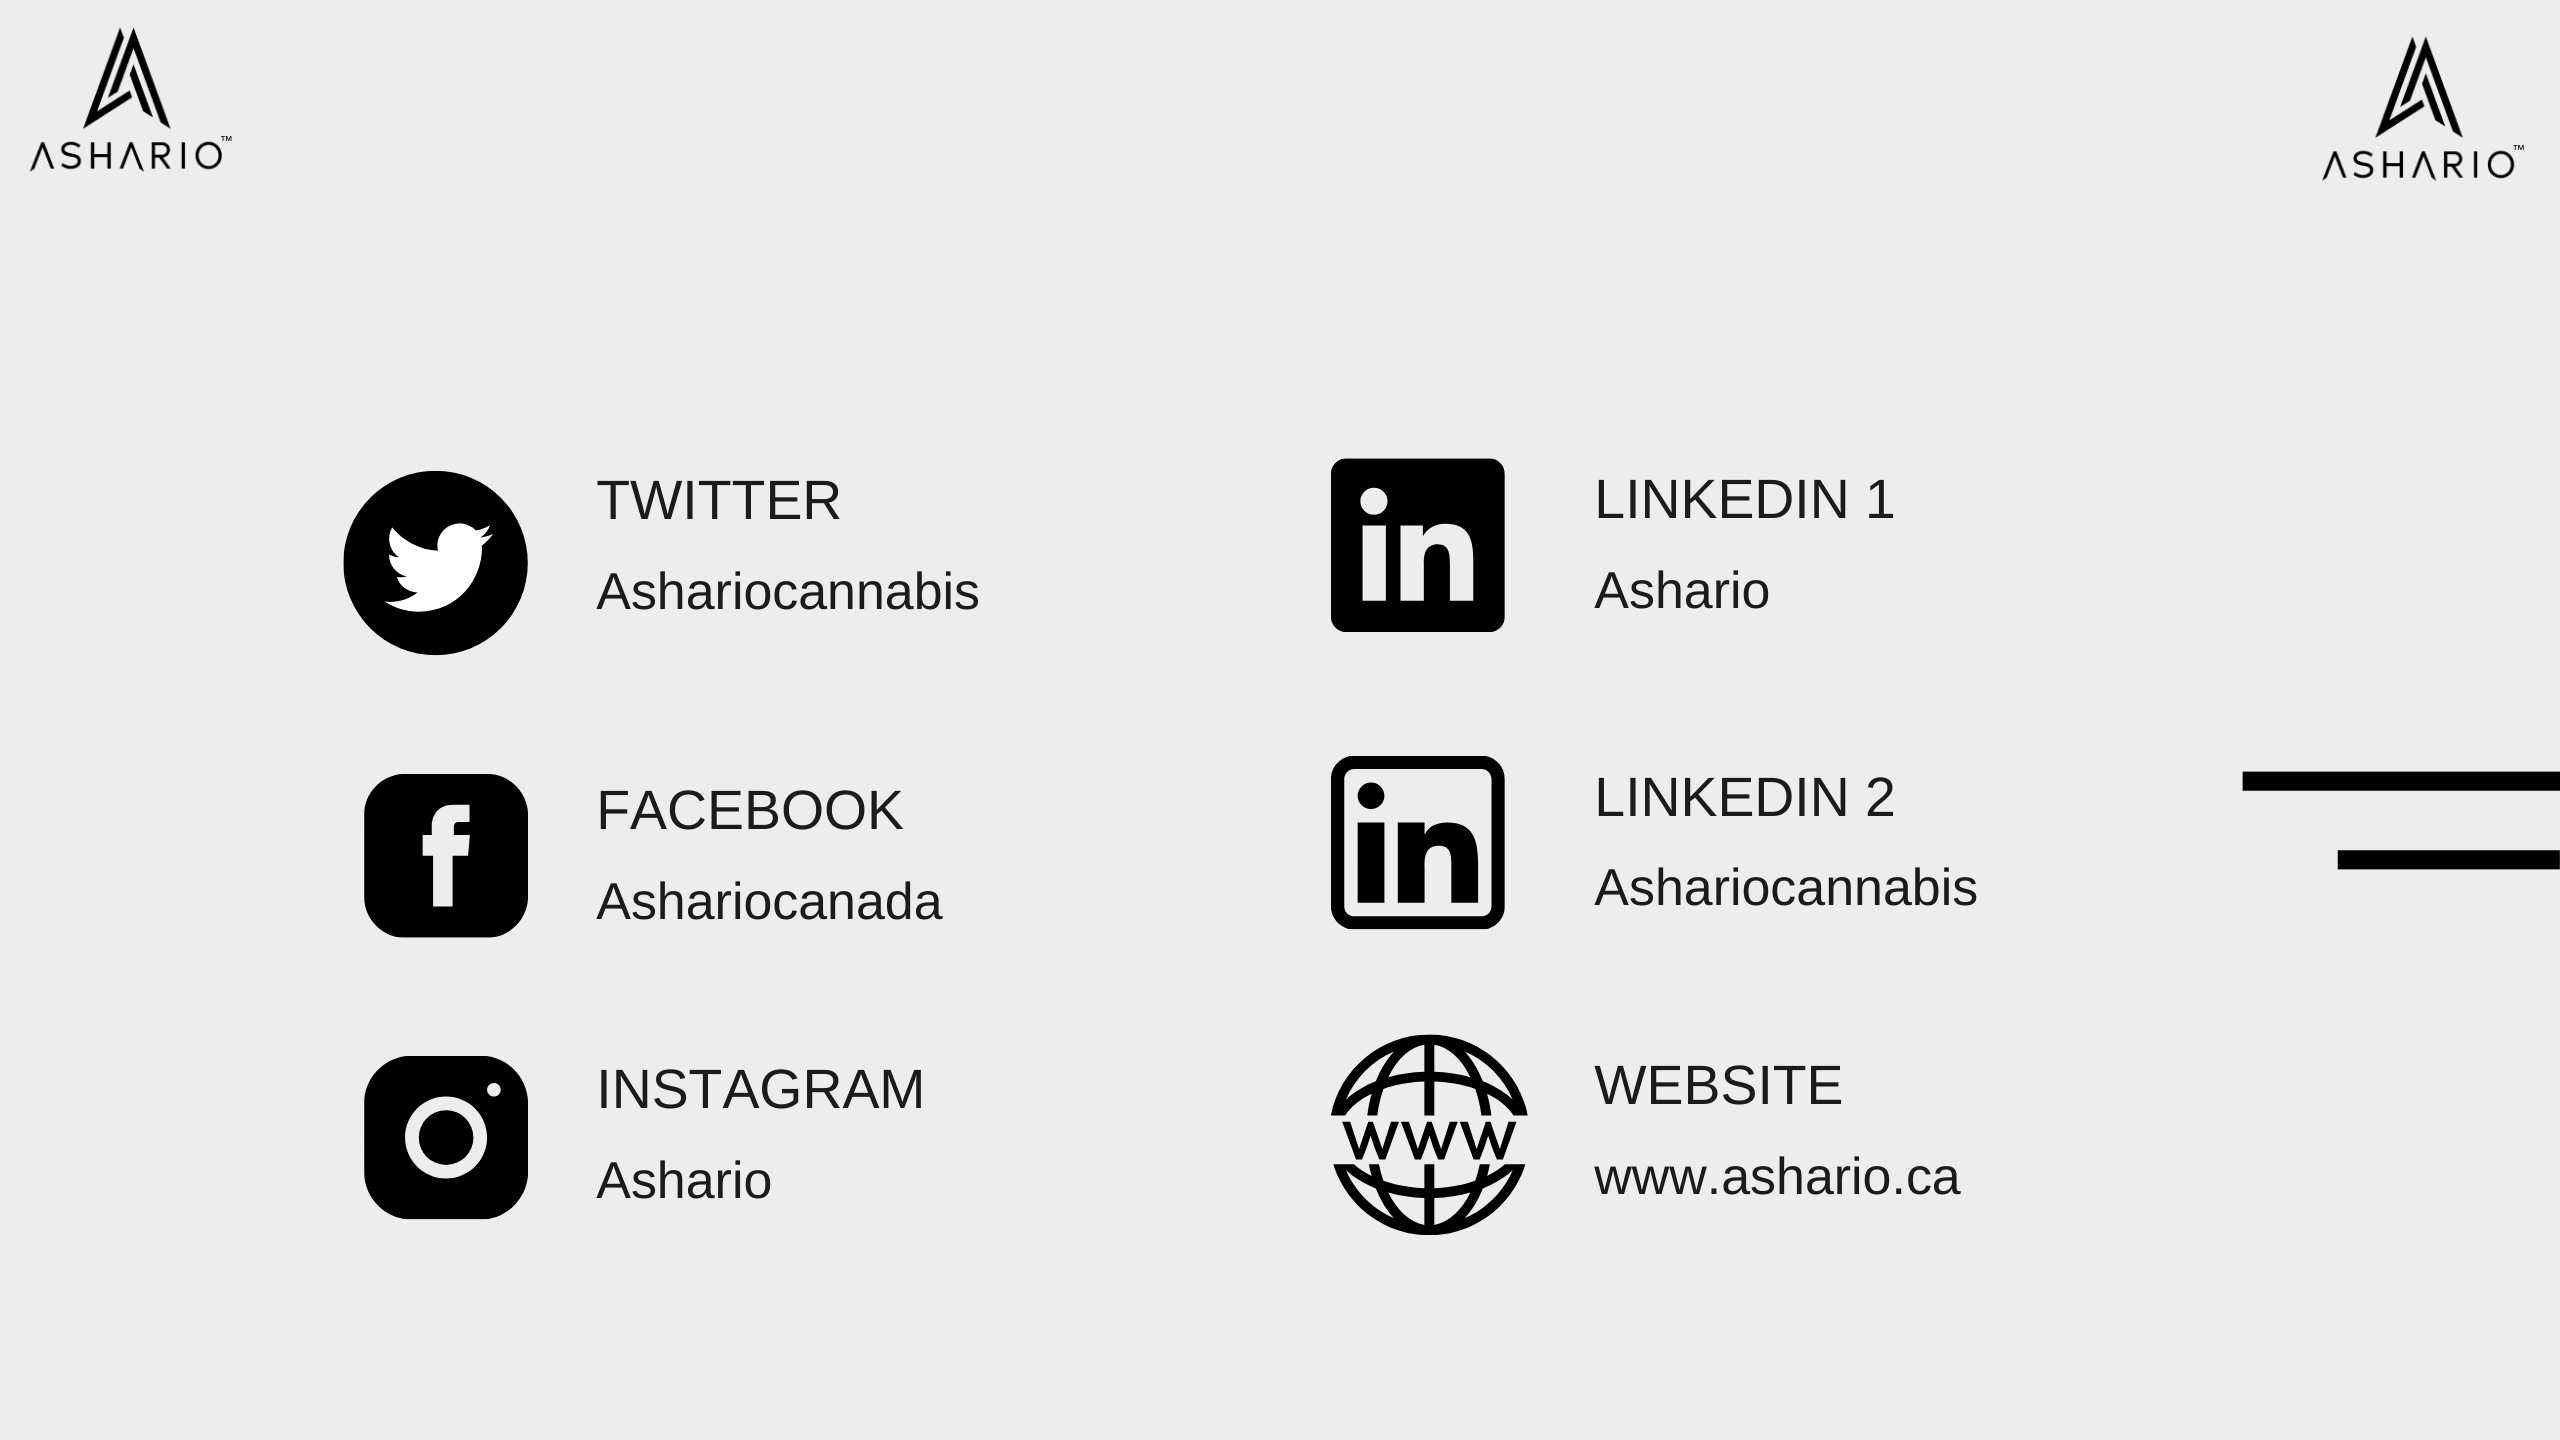 Stay in the loop with all the latest cannabis updates in North York by following us! Our social media channels are your go-to source for news, promotions, and events related to cannabis in the area.